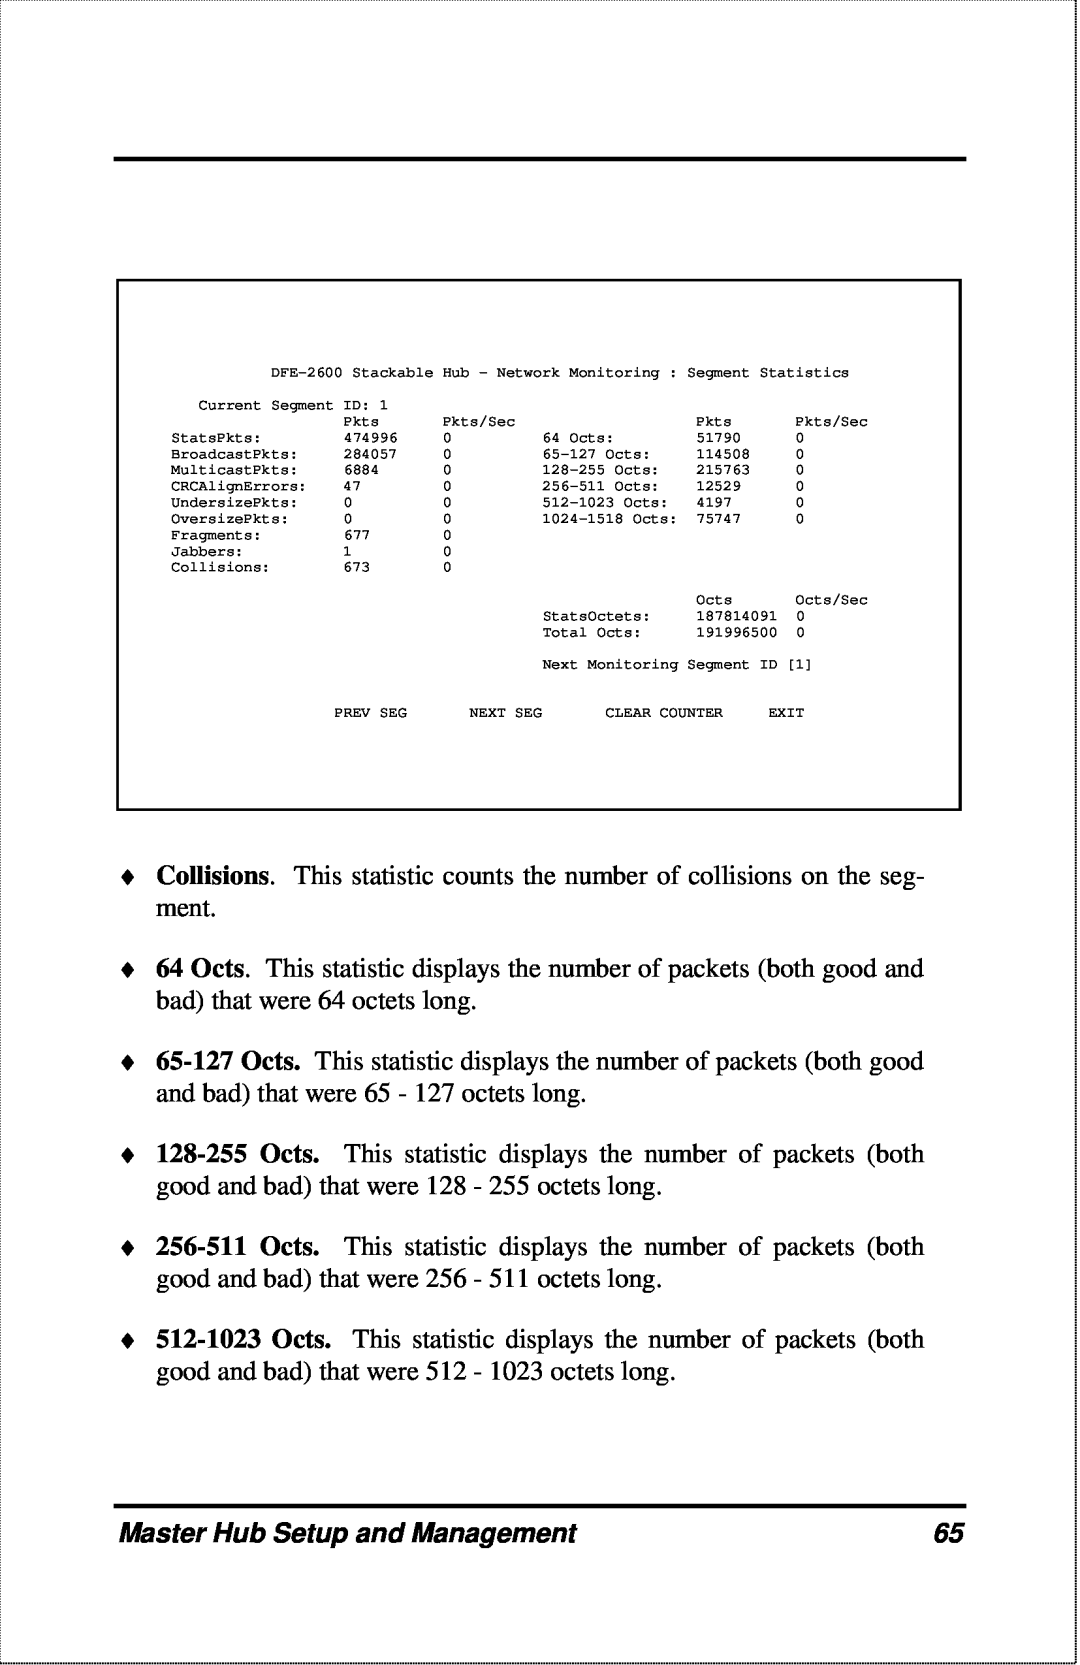 D-Link DFE-2600 manual Collisions. This statistic counts the number of collisions on the seg- ment 